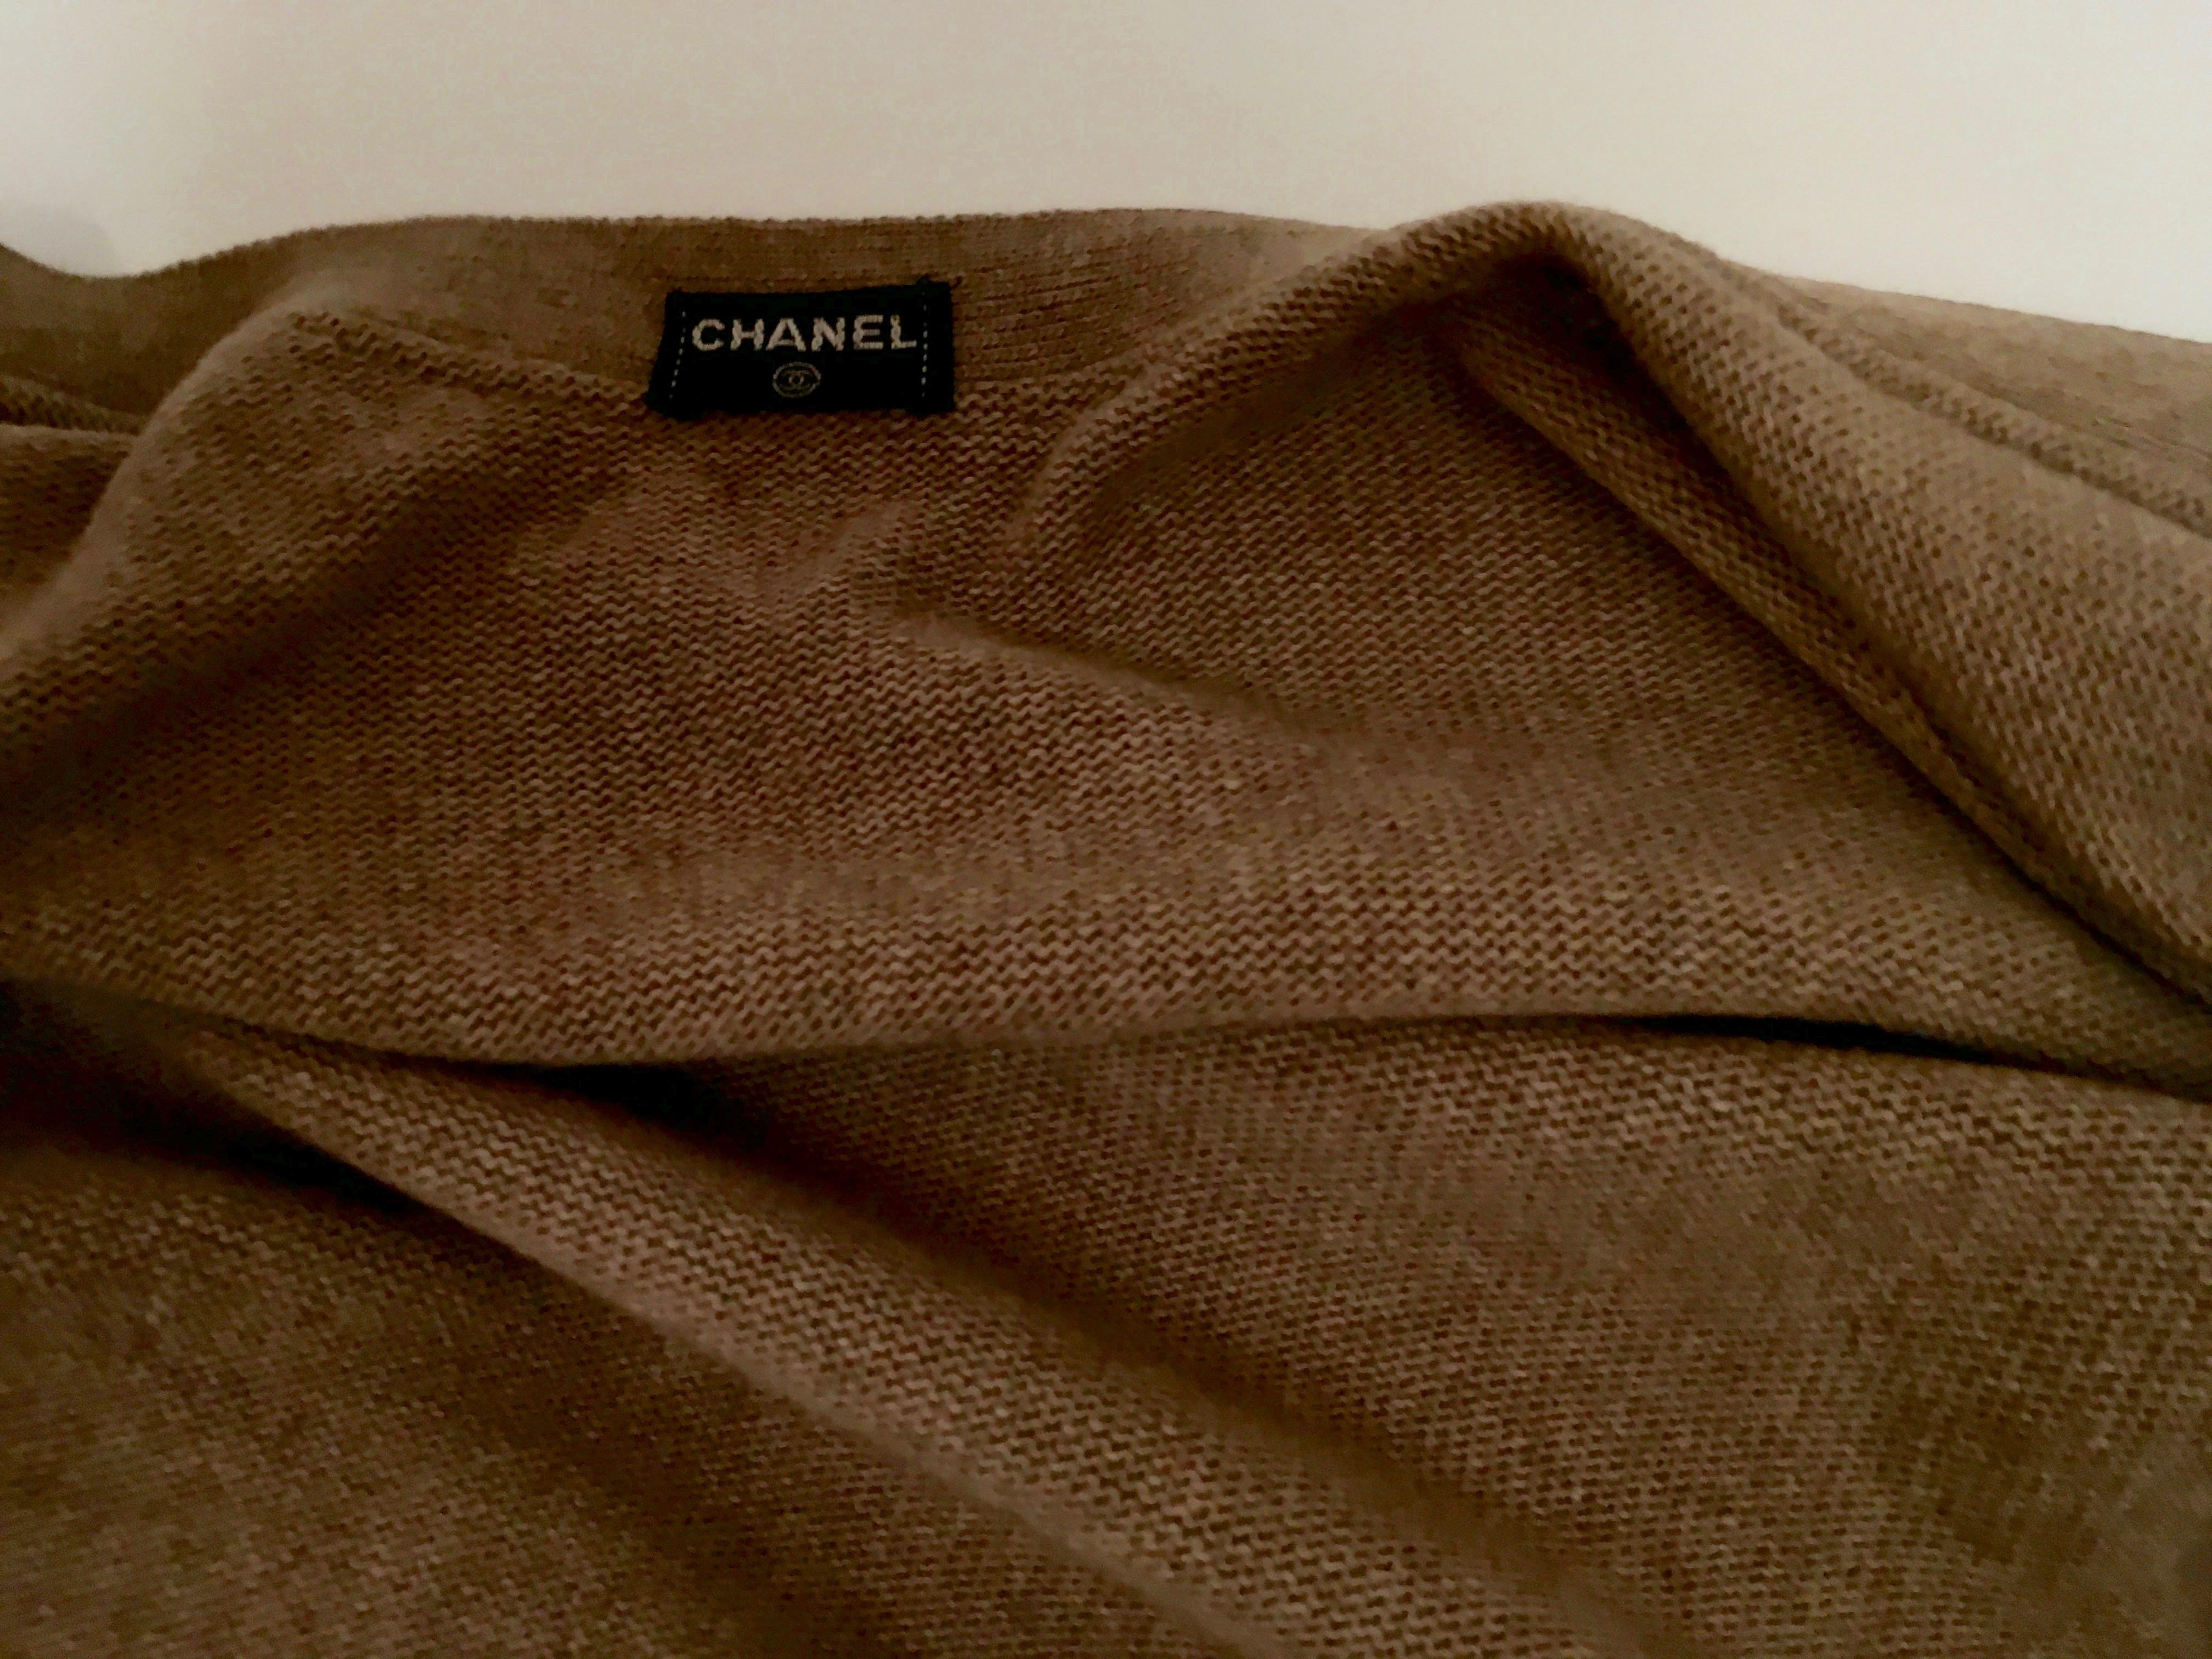 Vintage Chanel Cardigan Sweater... Cashmere Timeless Classic In Good Condition For Sale In Boca Raton, FL